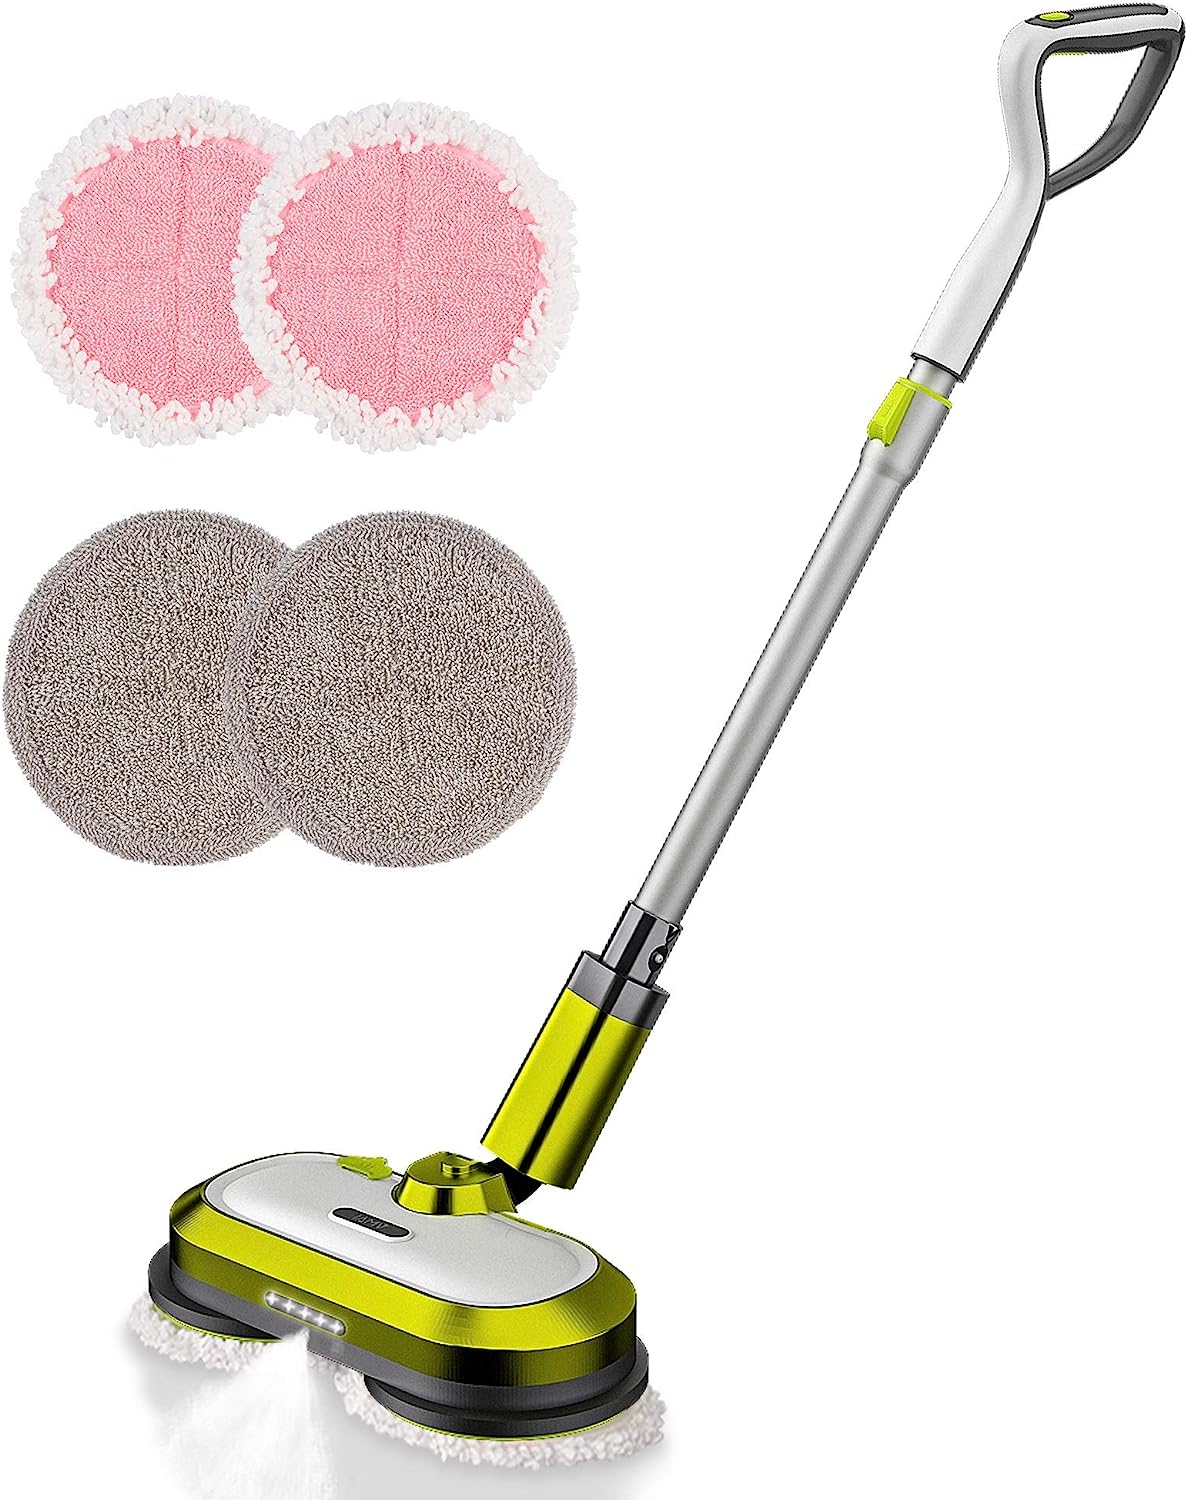 Cordless Electric Mop, Electric Spin Mop with LED [...]